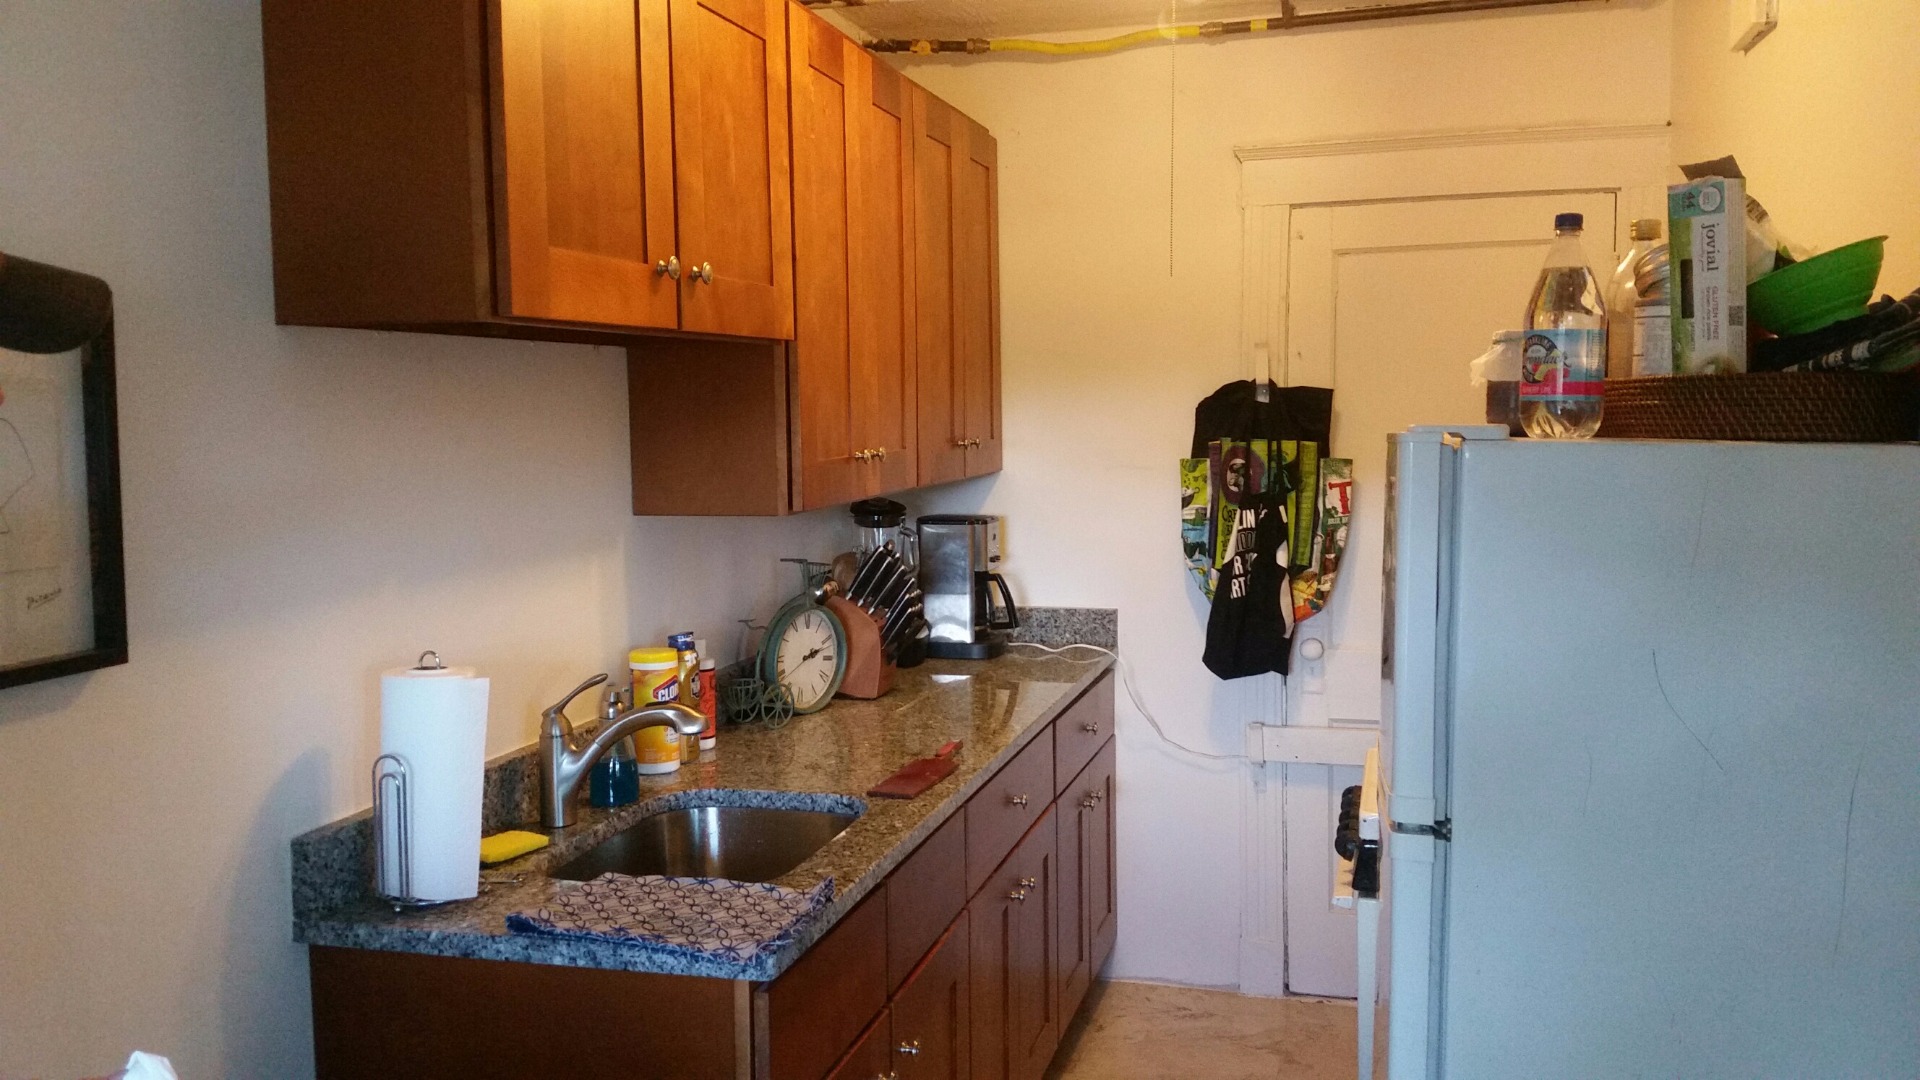 Photos of apartment on Soldiers Field Rd.,Boston MA 02135